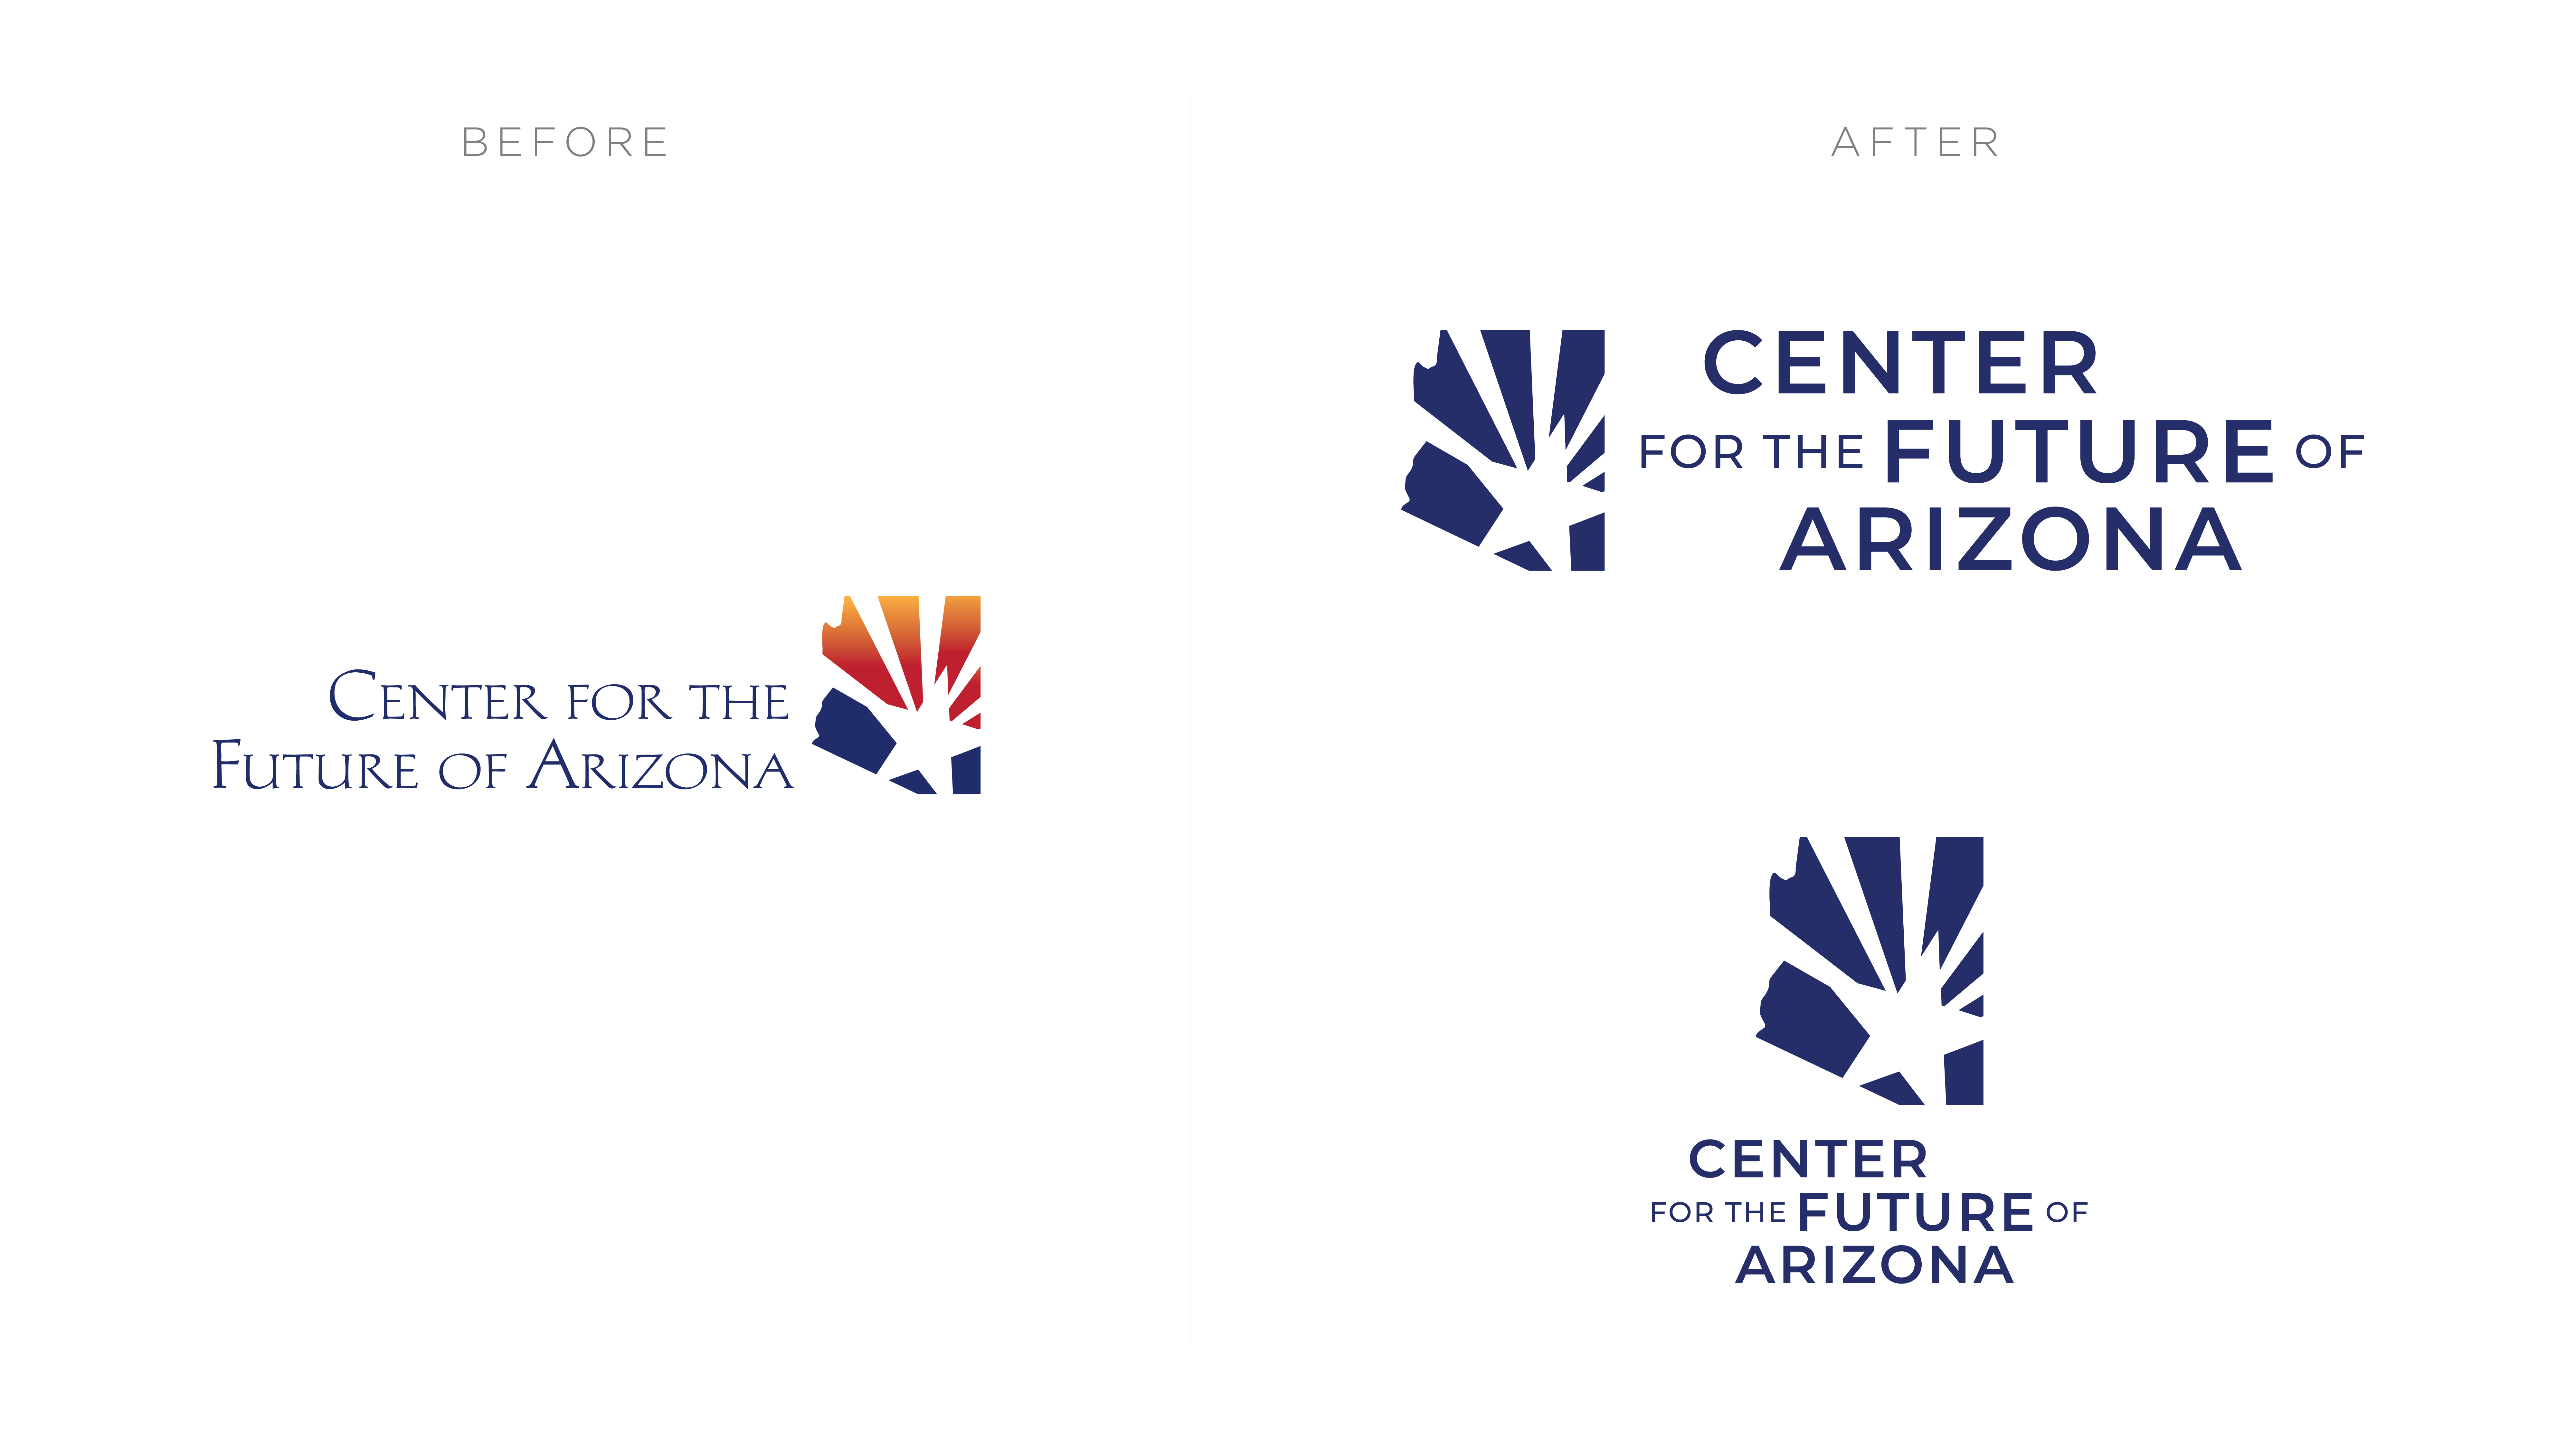 featured image four:Center for the Future of Arizona Rebrand & Print Campaign